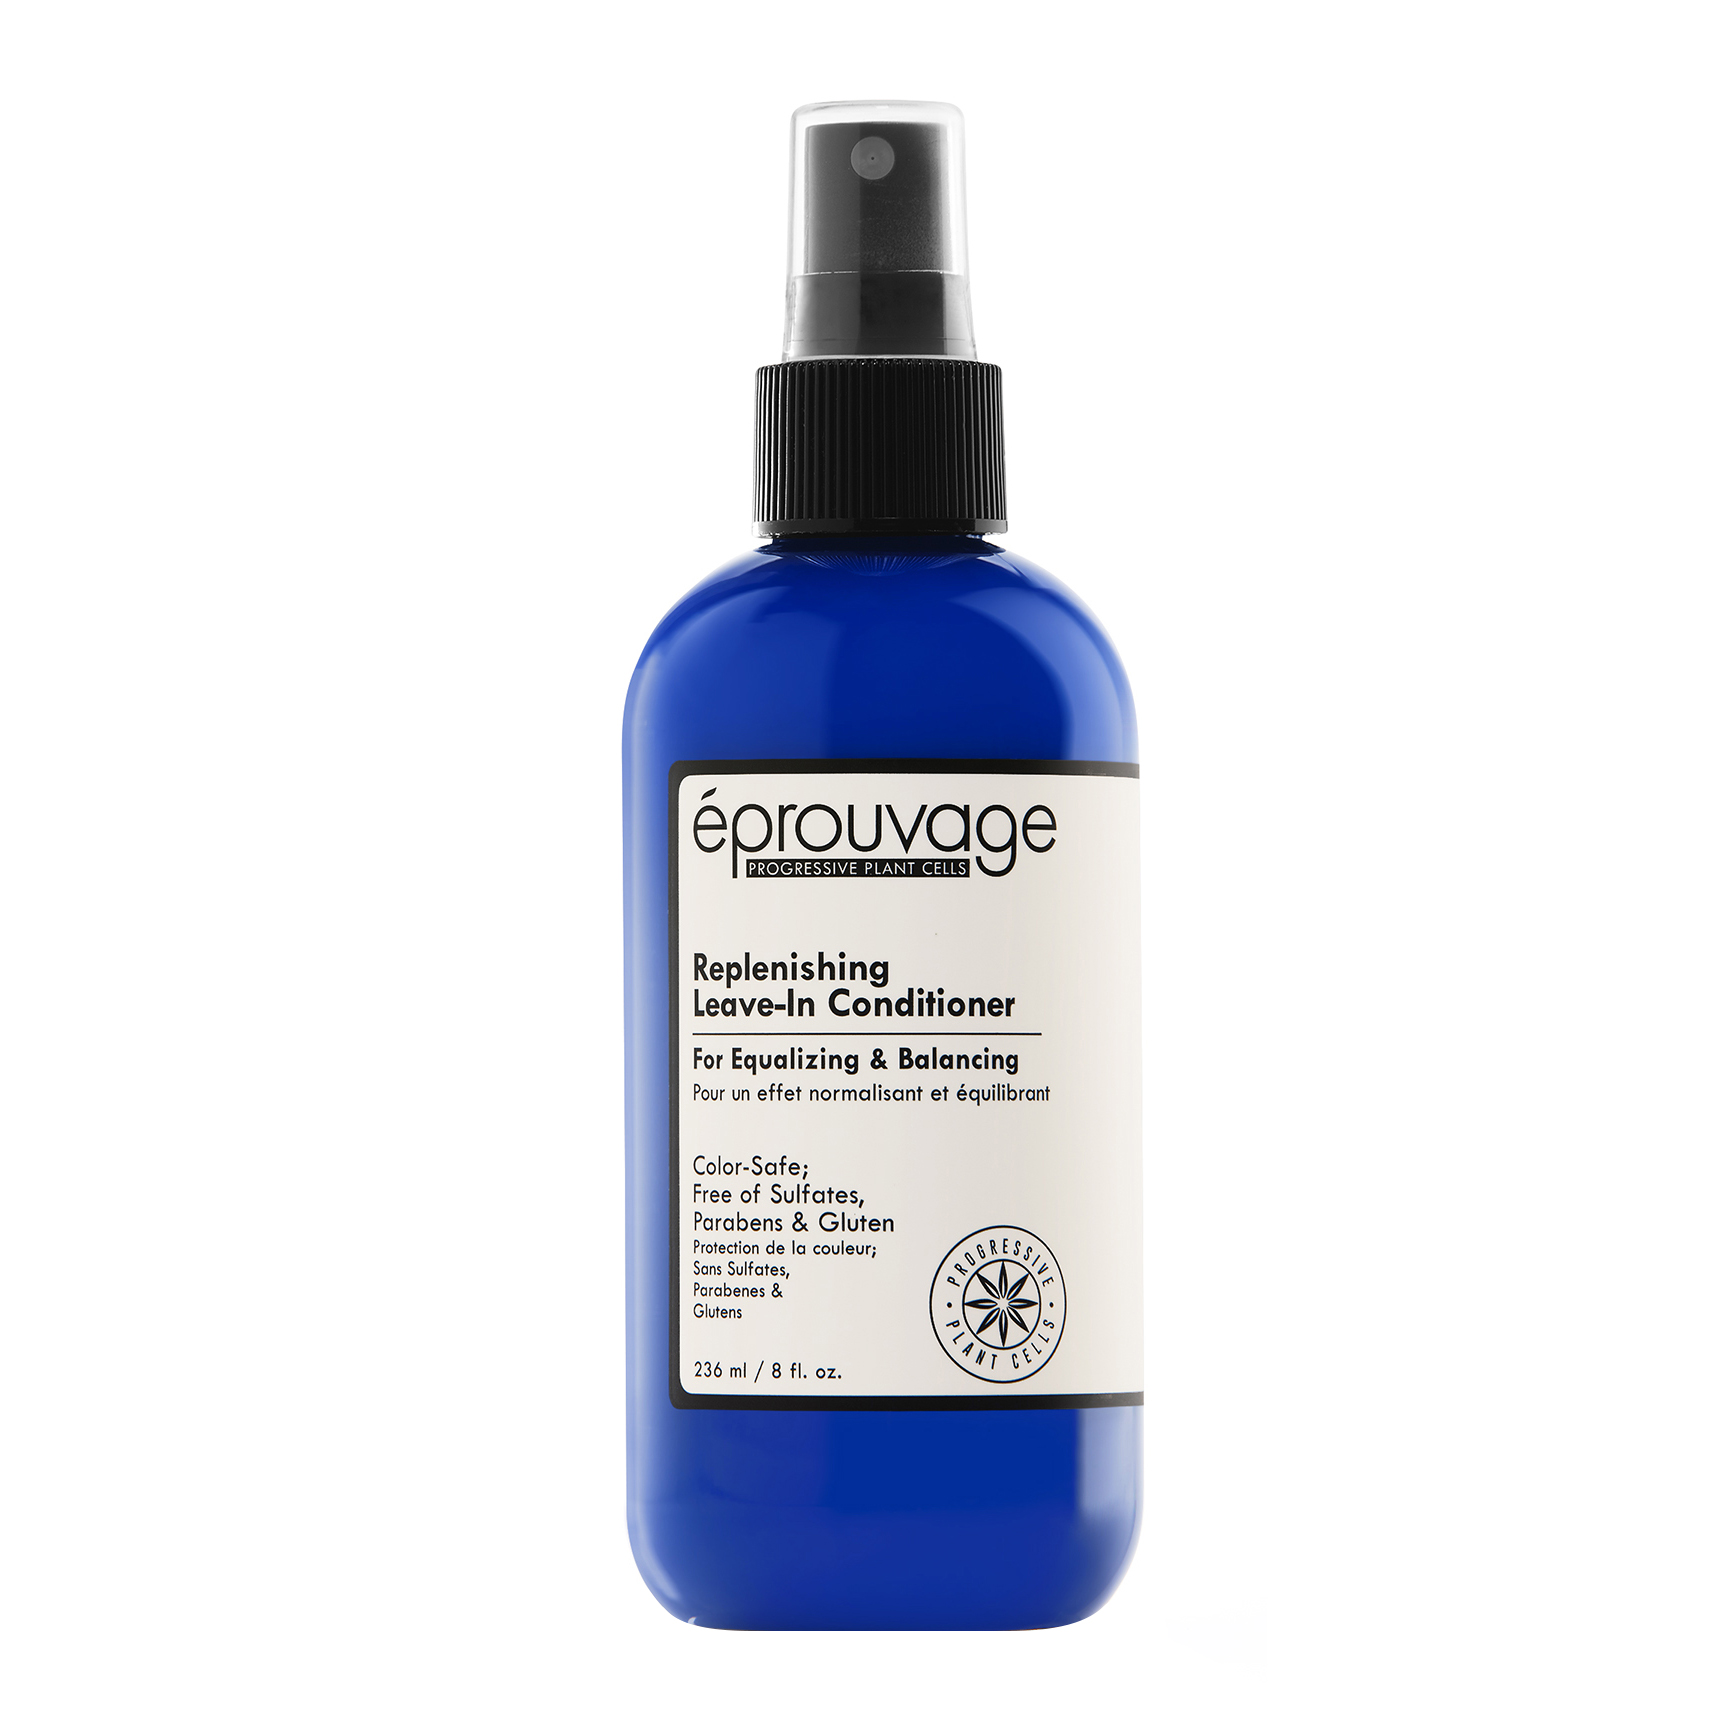 Replenishing Leave-In Conditioner - 236.5ml